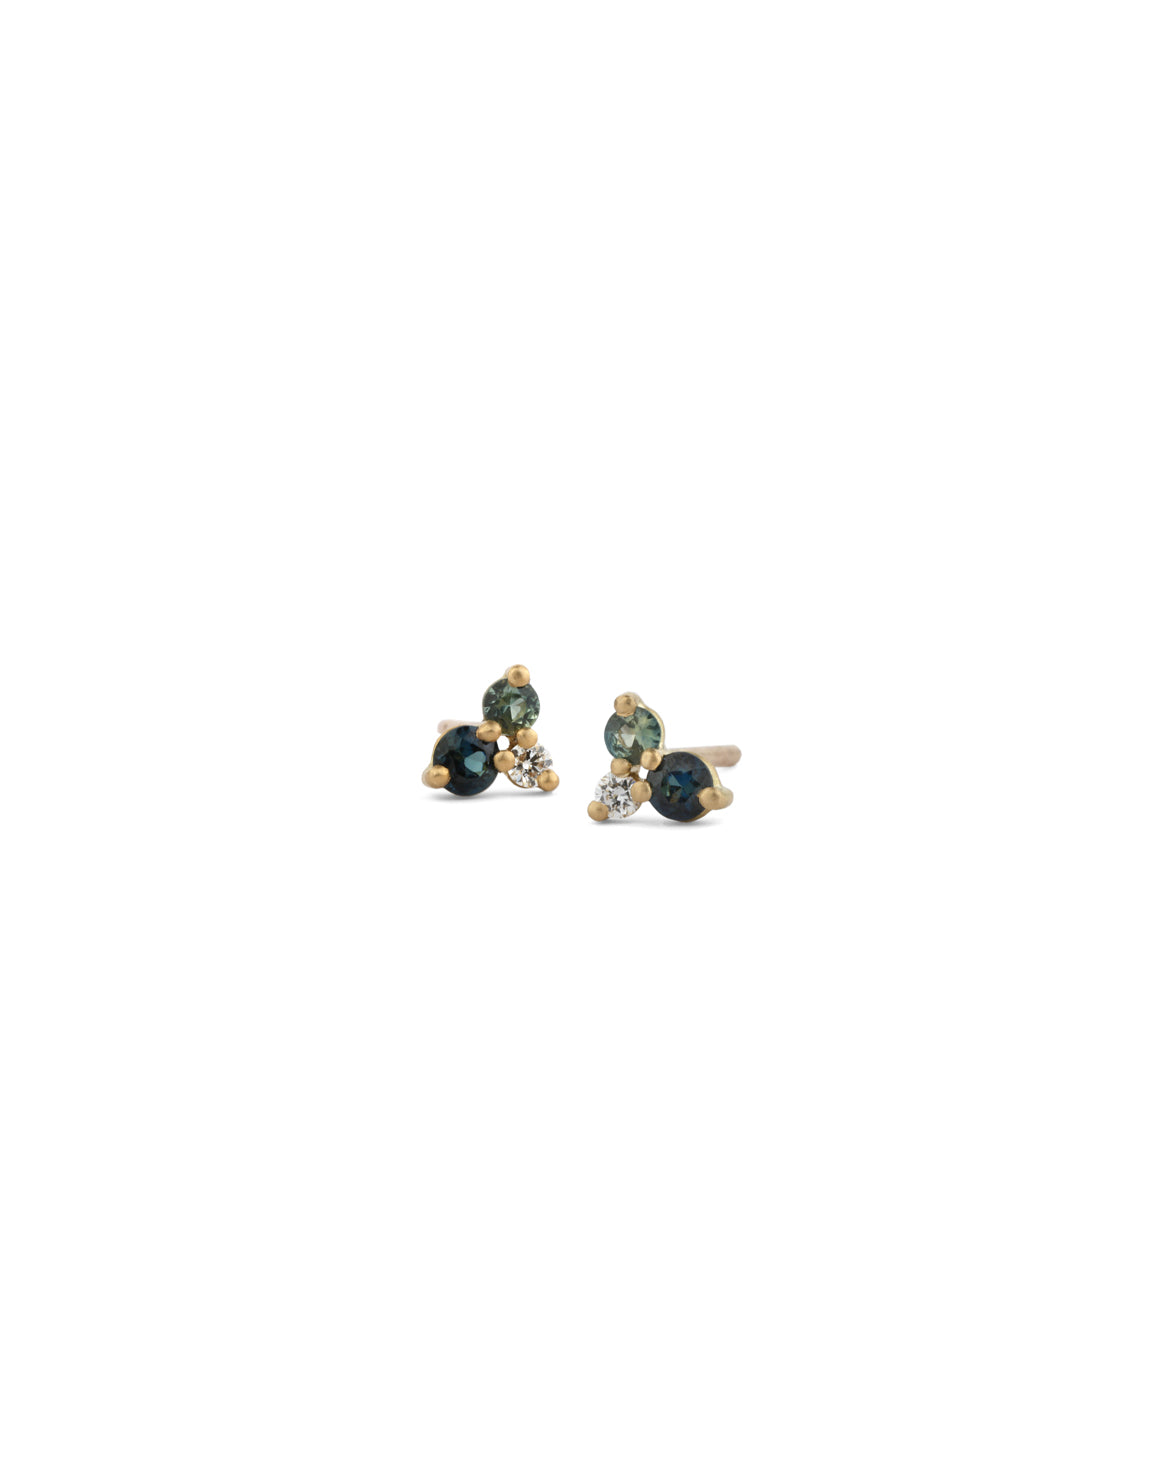 Blue and Green Round Trio Earrings